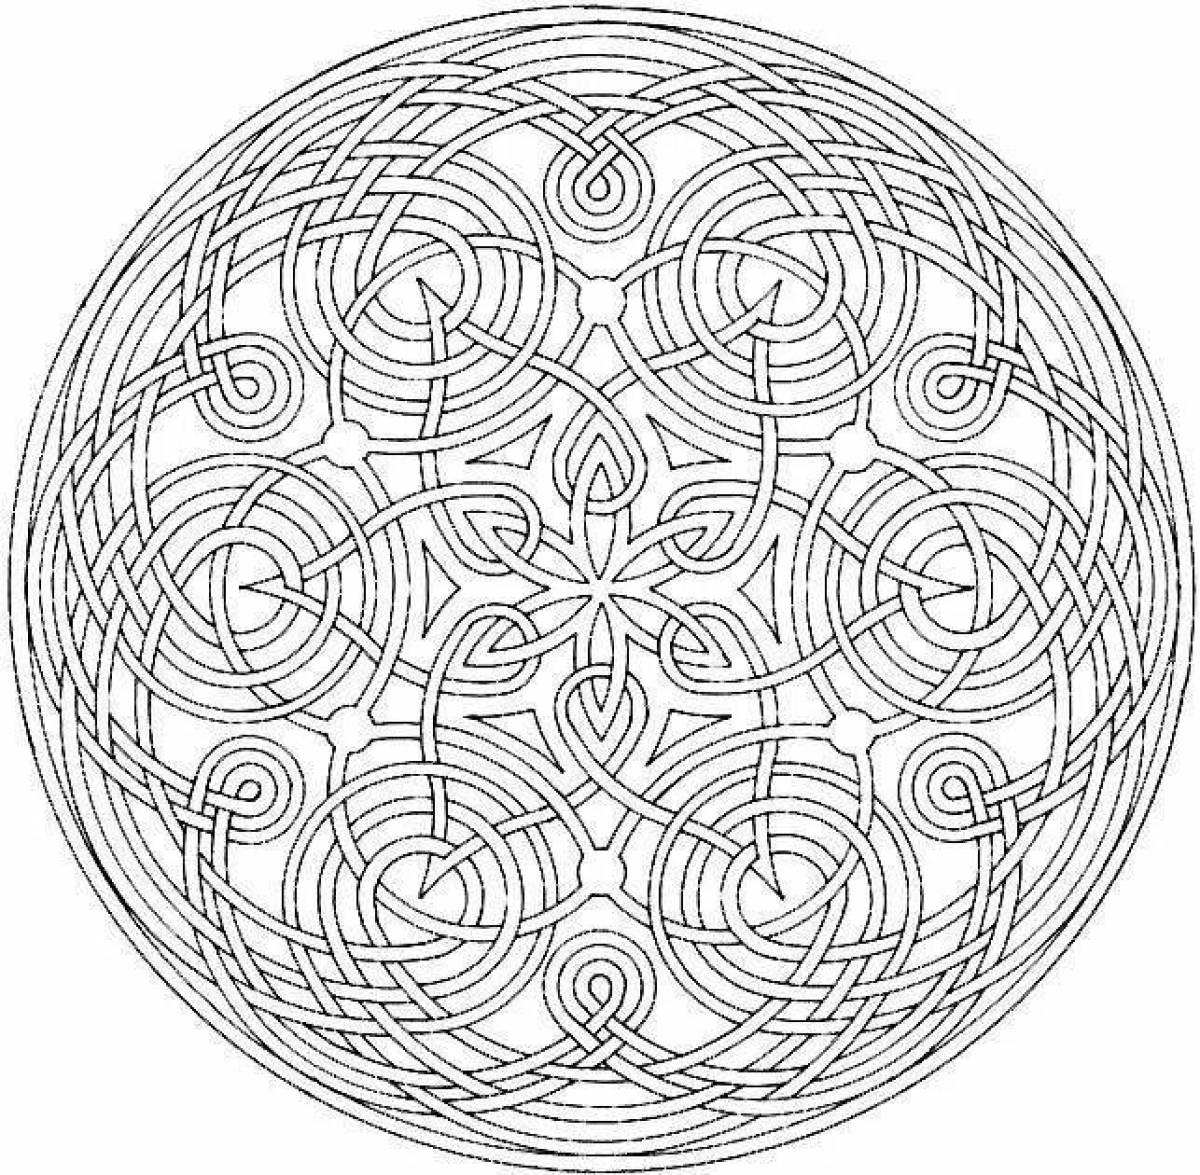 Gorgeous flower of life coloring book